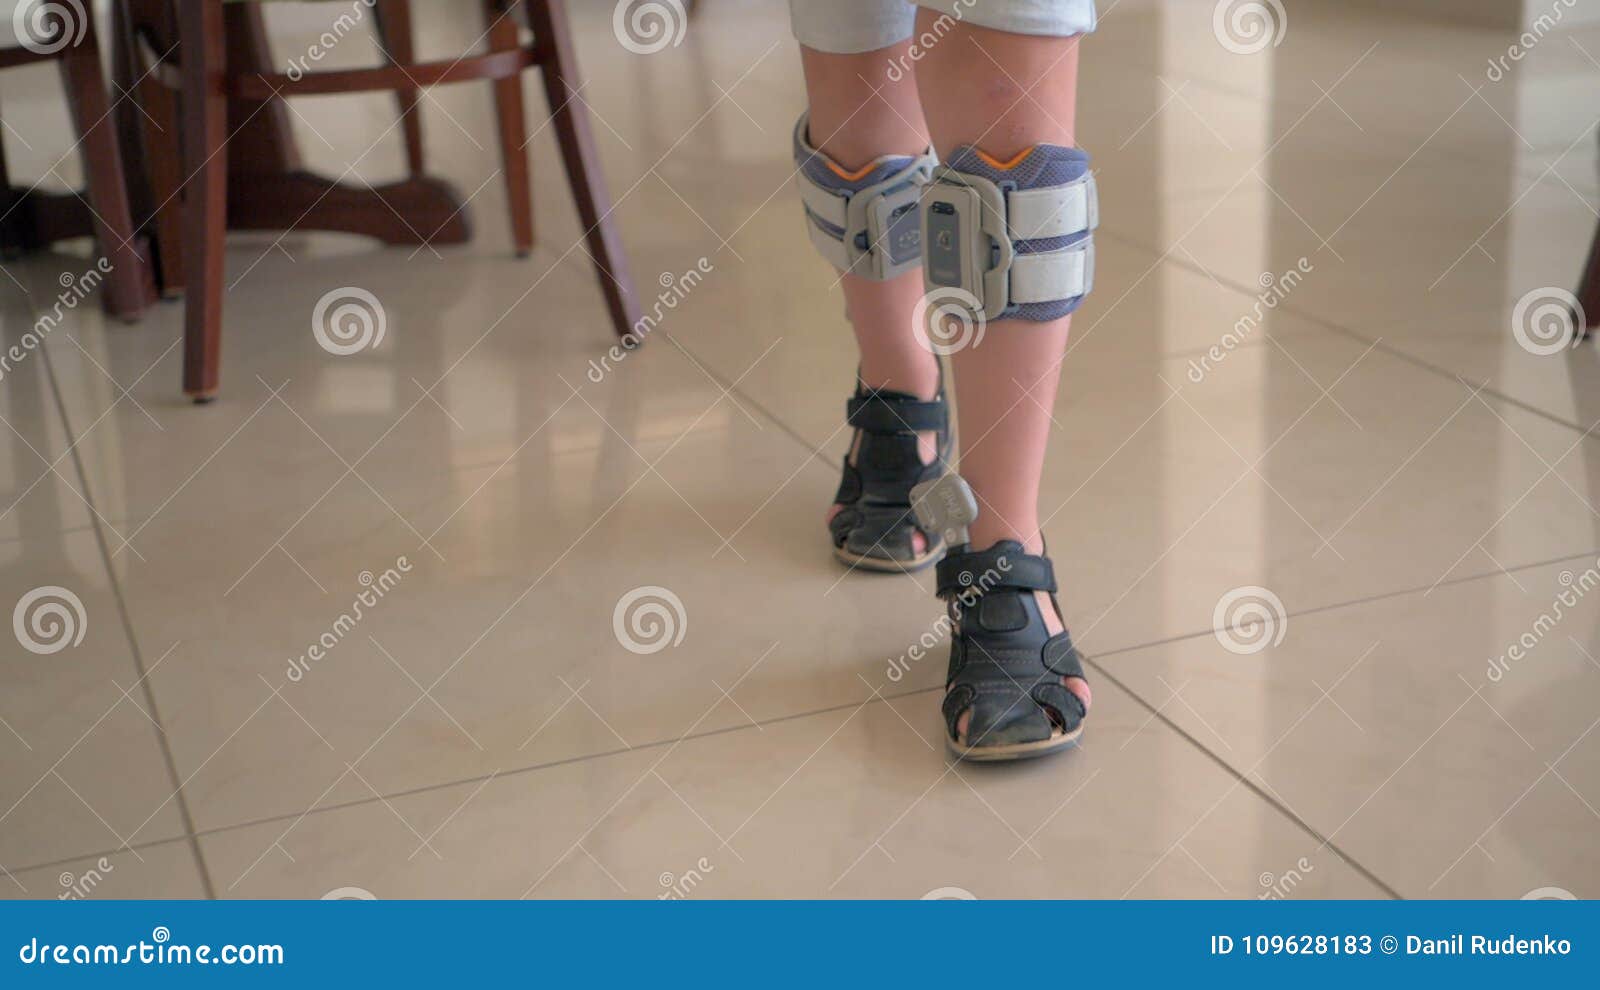 https://thumbs.dreamstime.com/z/therapy-functional-electrical-stimulation-kid-wearing-foot-drop-system-slow-motion-shot-kid-walking-indoor-child-wearing-109628183.jpg